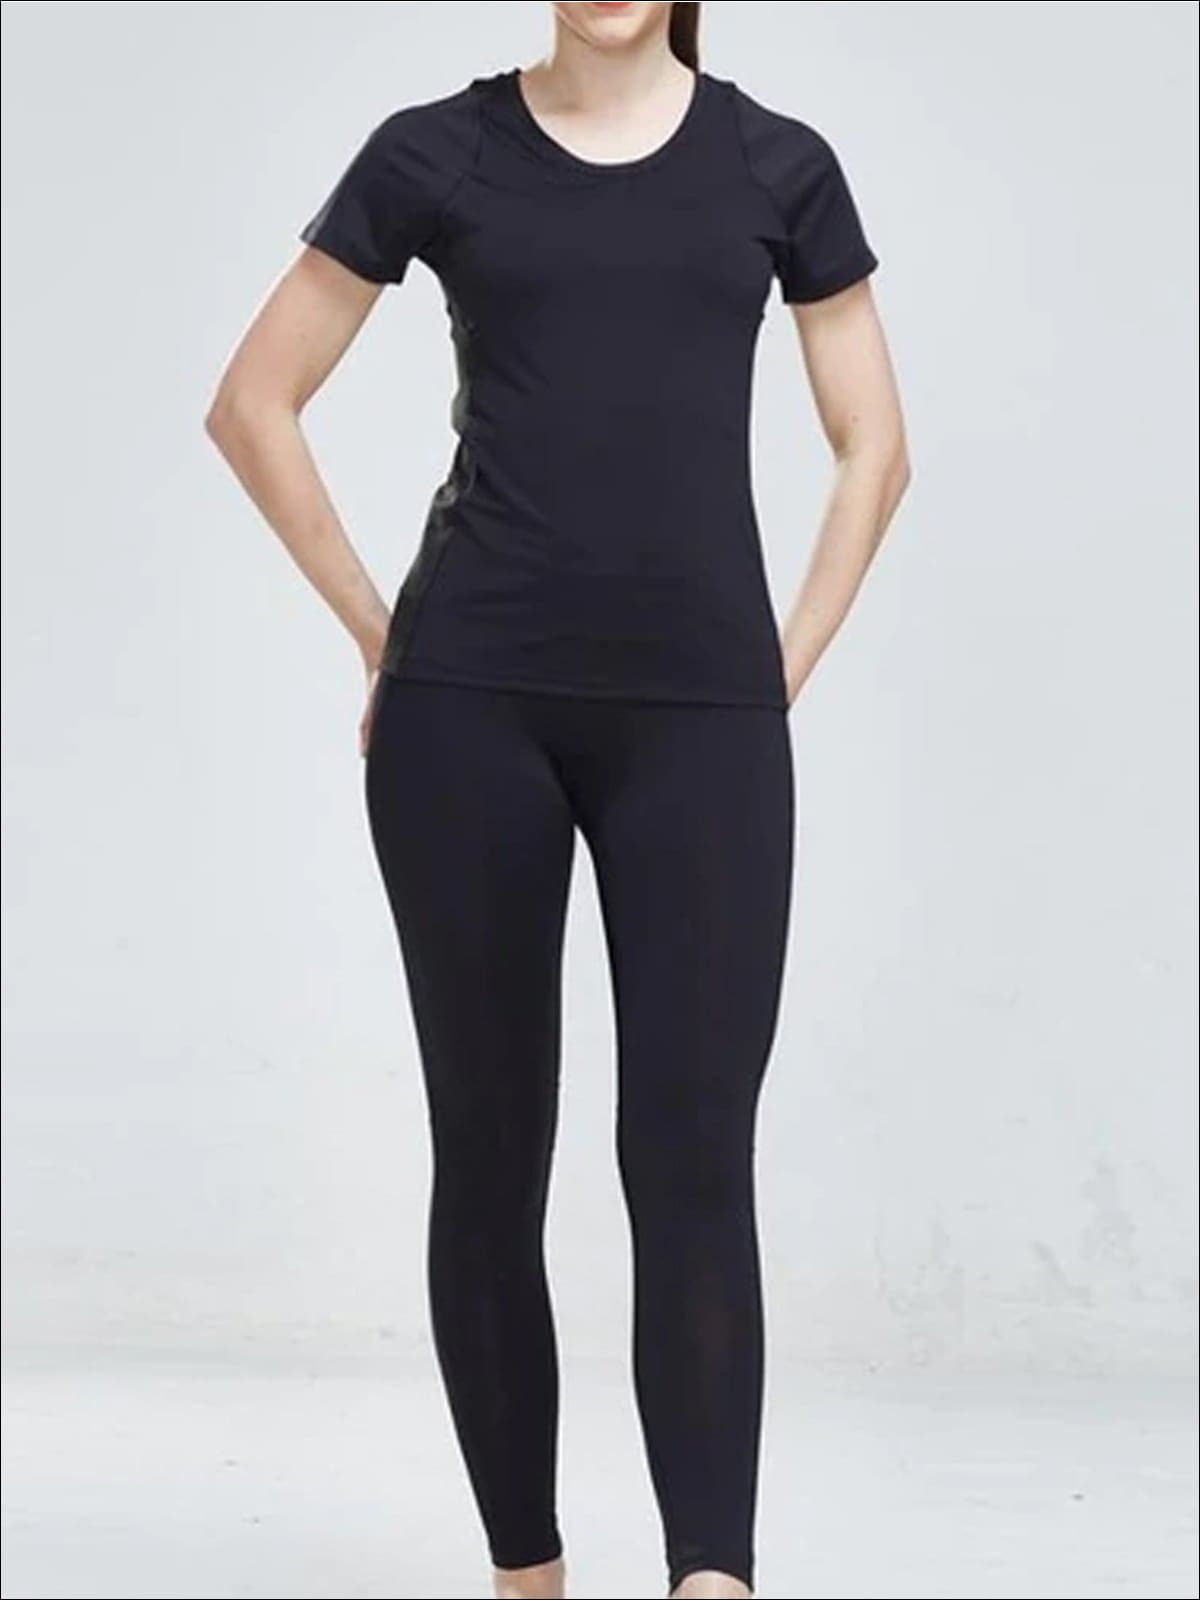 Womens Perforated Detail Workout Top & Leggings Set - Black / S - Womens Activewear